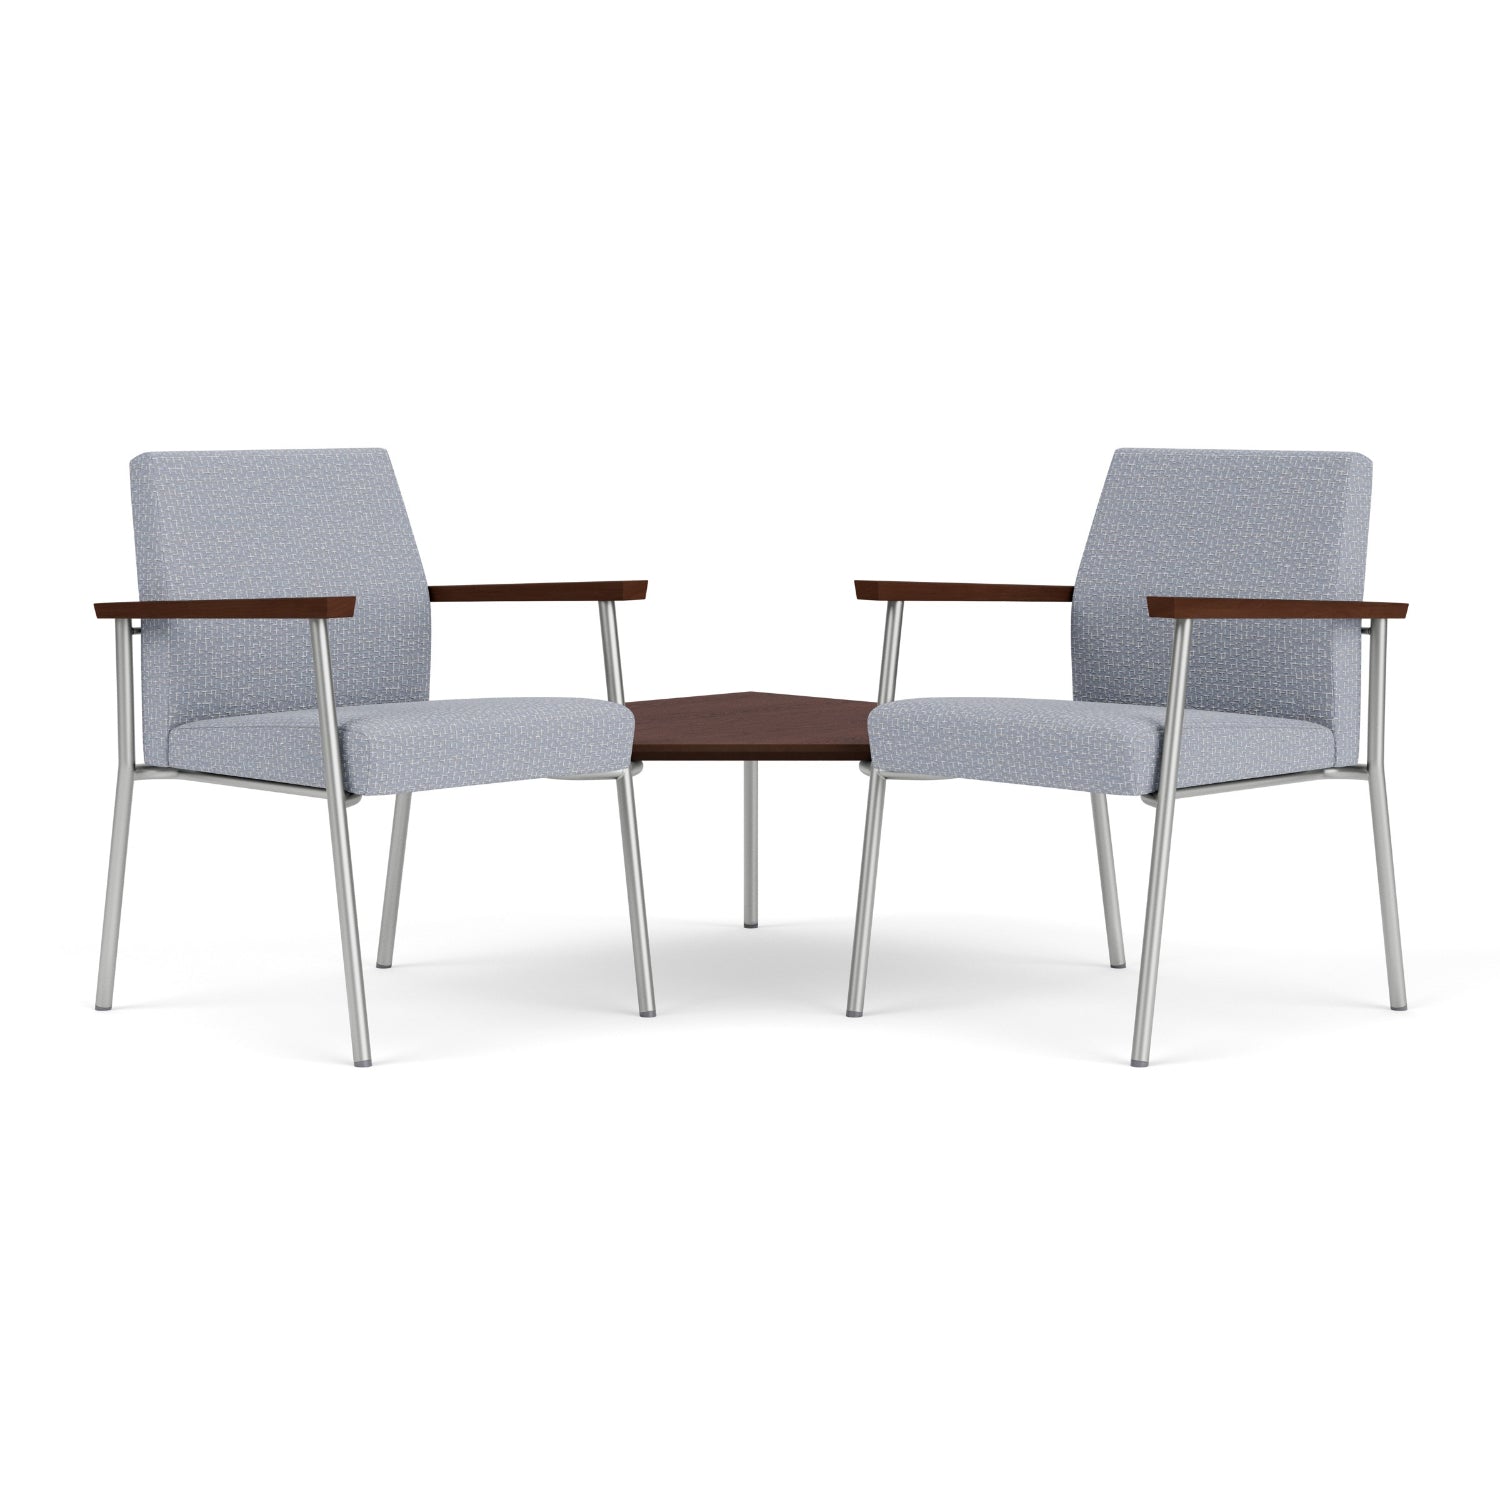 Mystic Guest Collection Reception Seating, 2 Chairs with Connecting Corner Table, Designer Fabric Upholstery, FREE SHIPPING